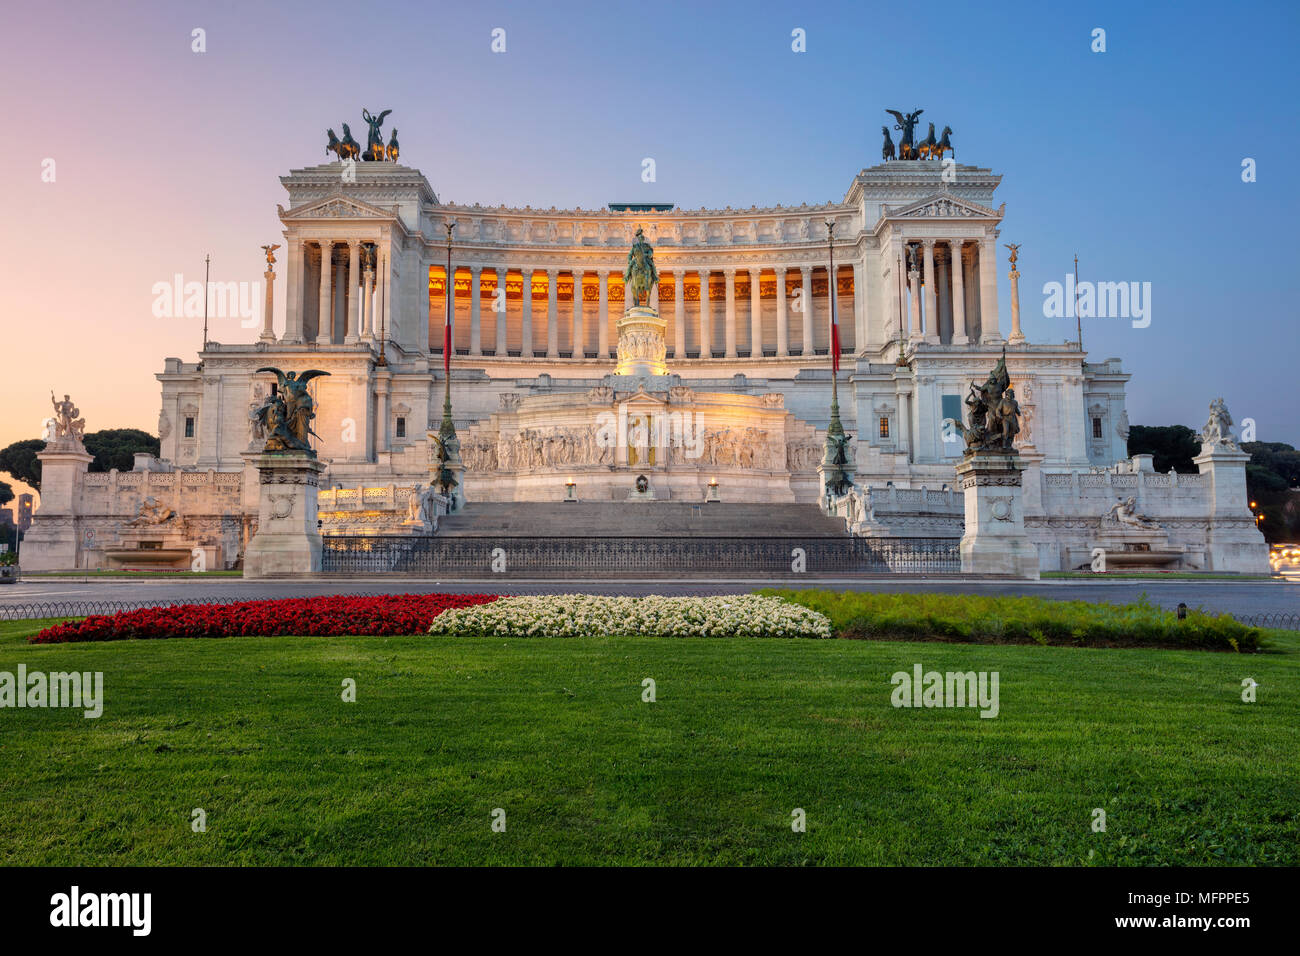 Rome. Cityscape image of the Monument of Victor Emmanuel II, Venezia Square, in Rome, Italy during sunrise. Stock Photo